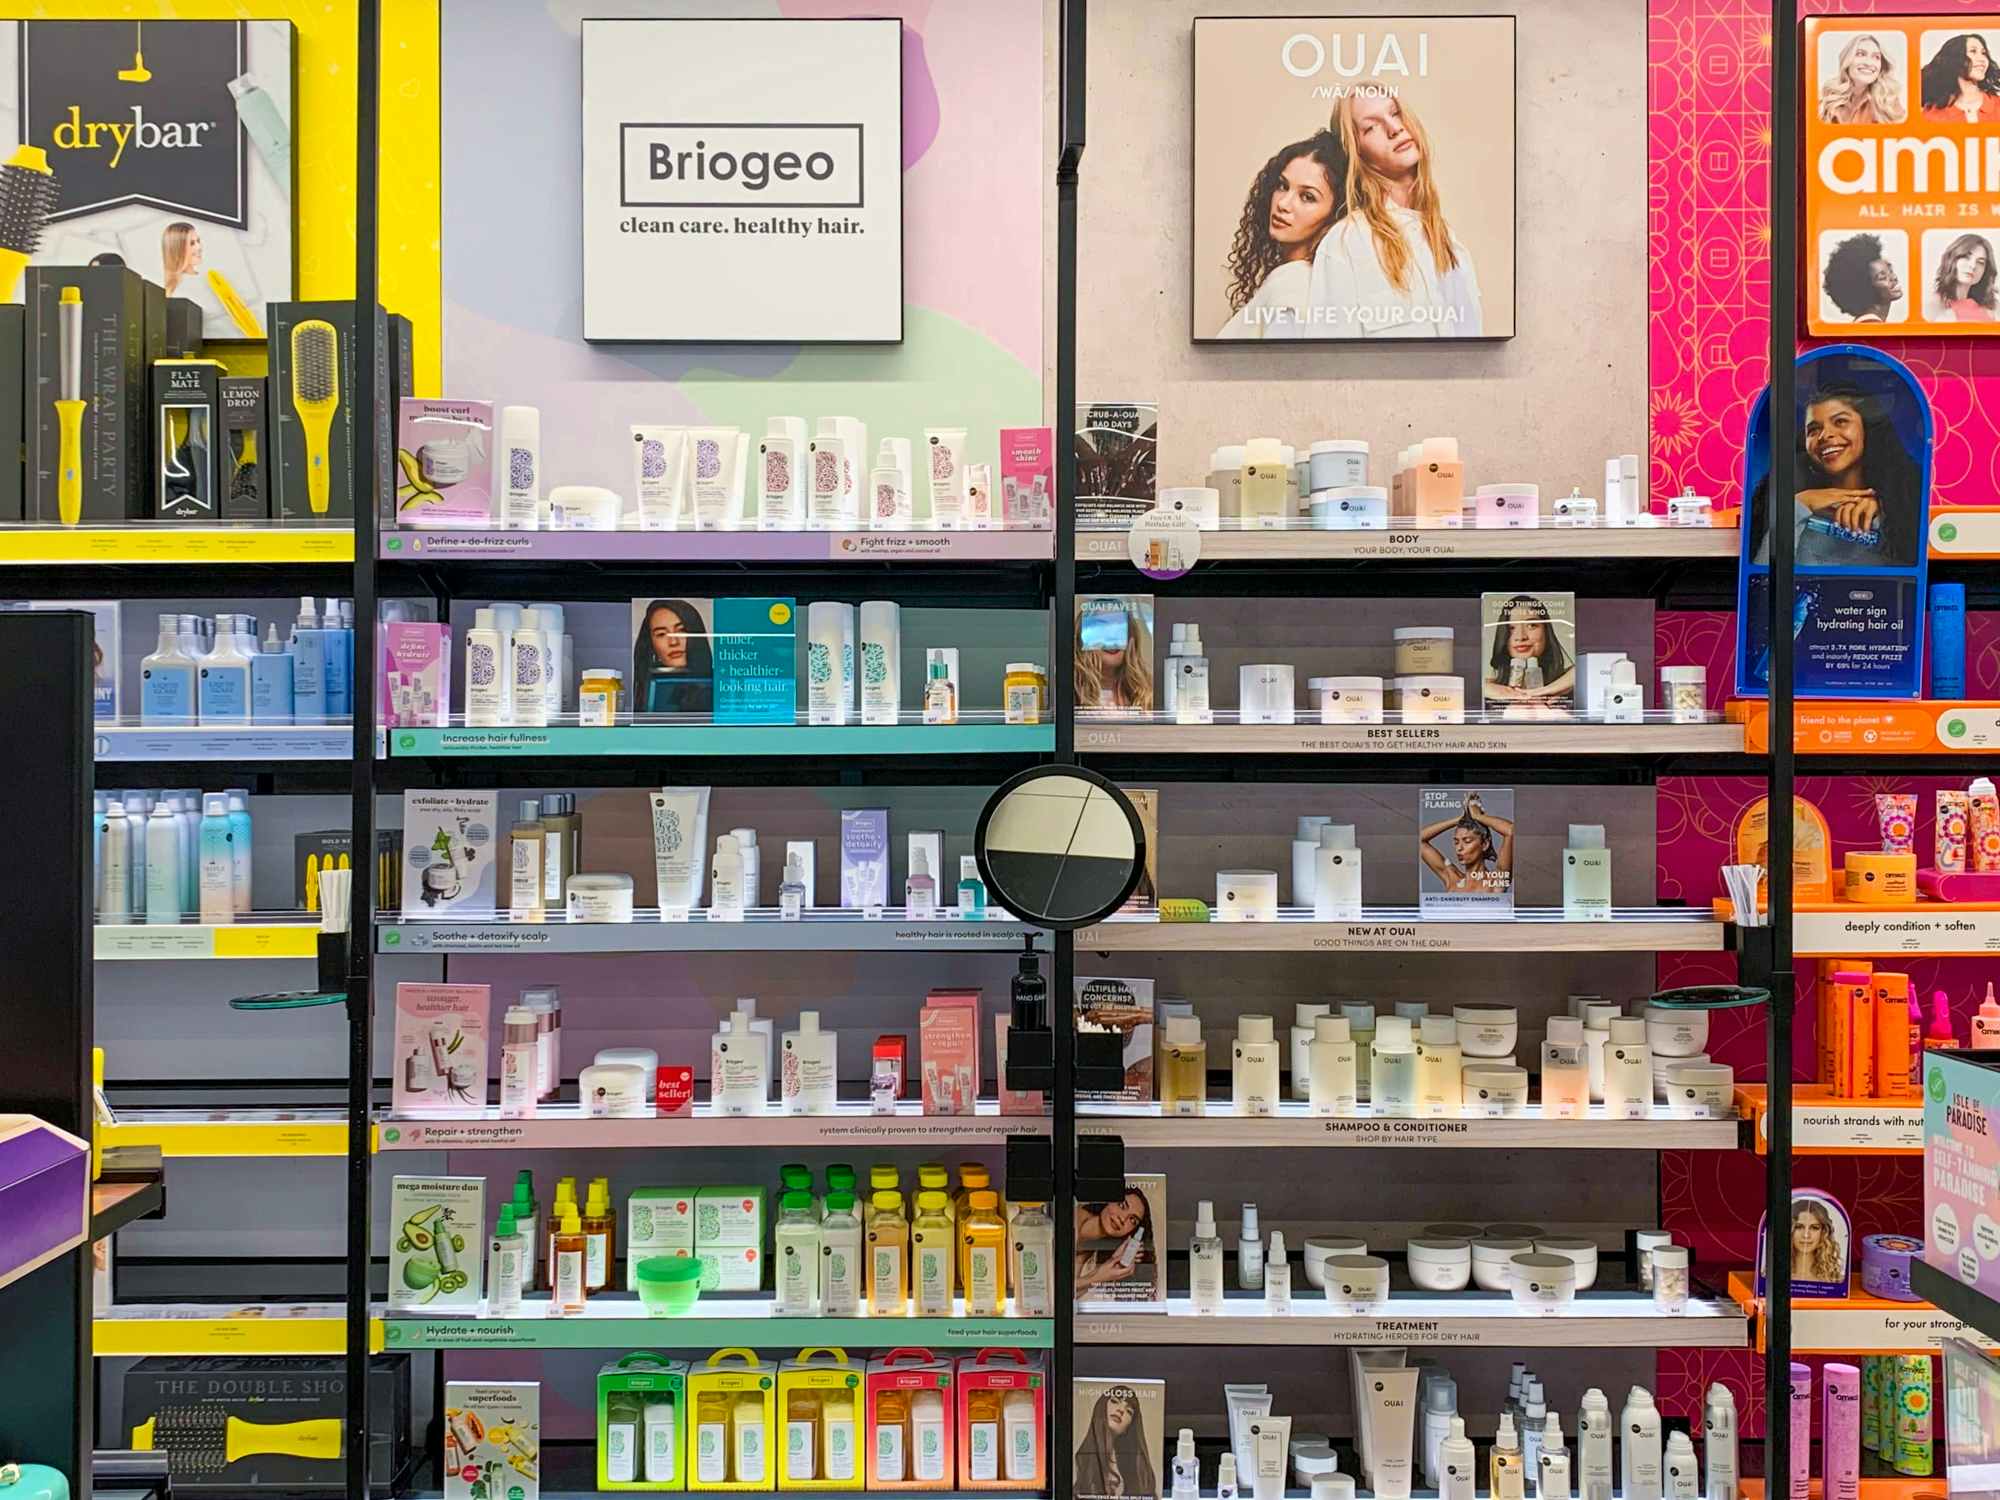 Haircare products on shelves at Sephora